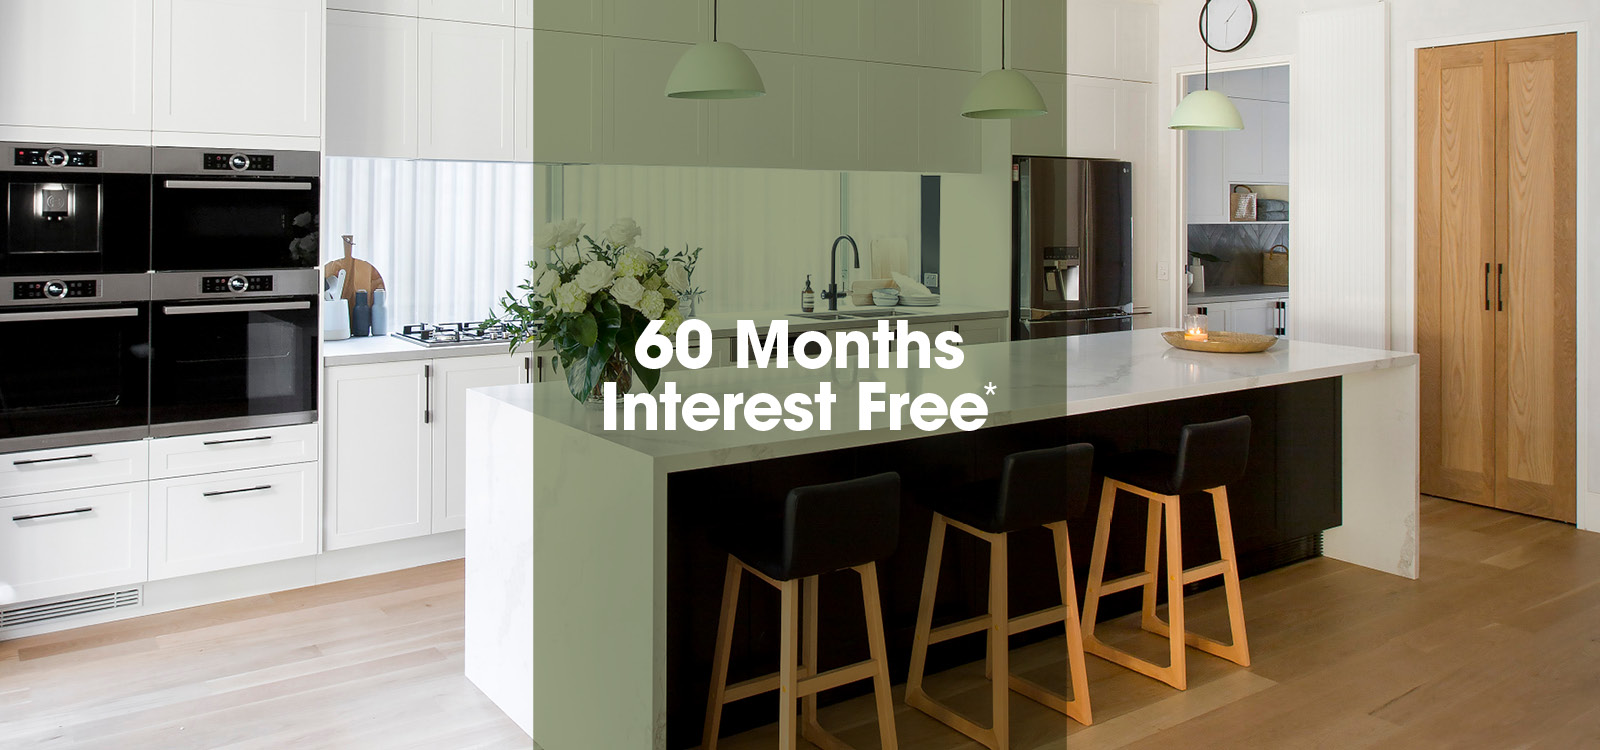 Freedom Kitchens - Home Offer